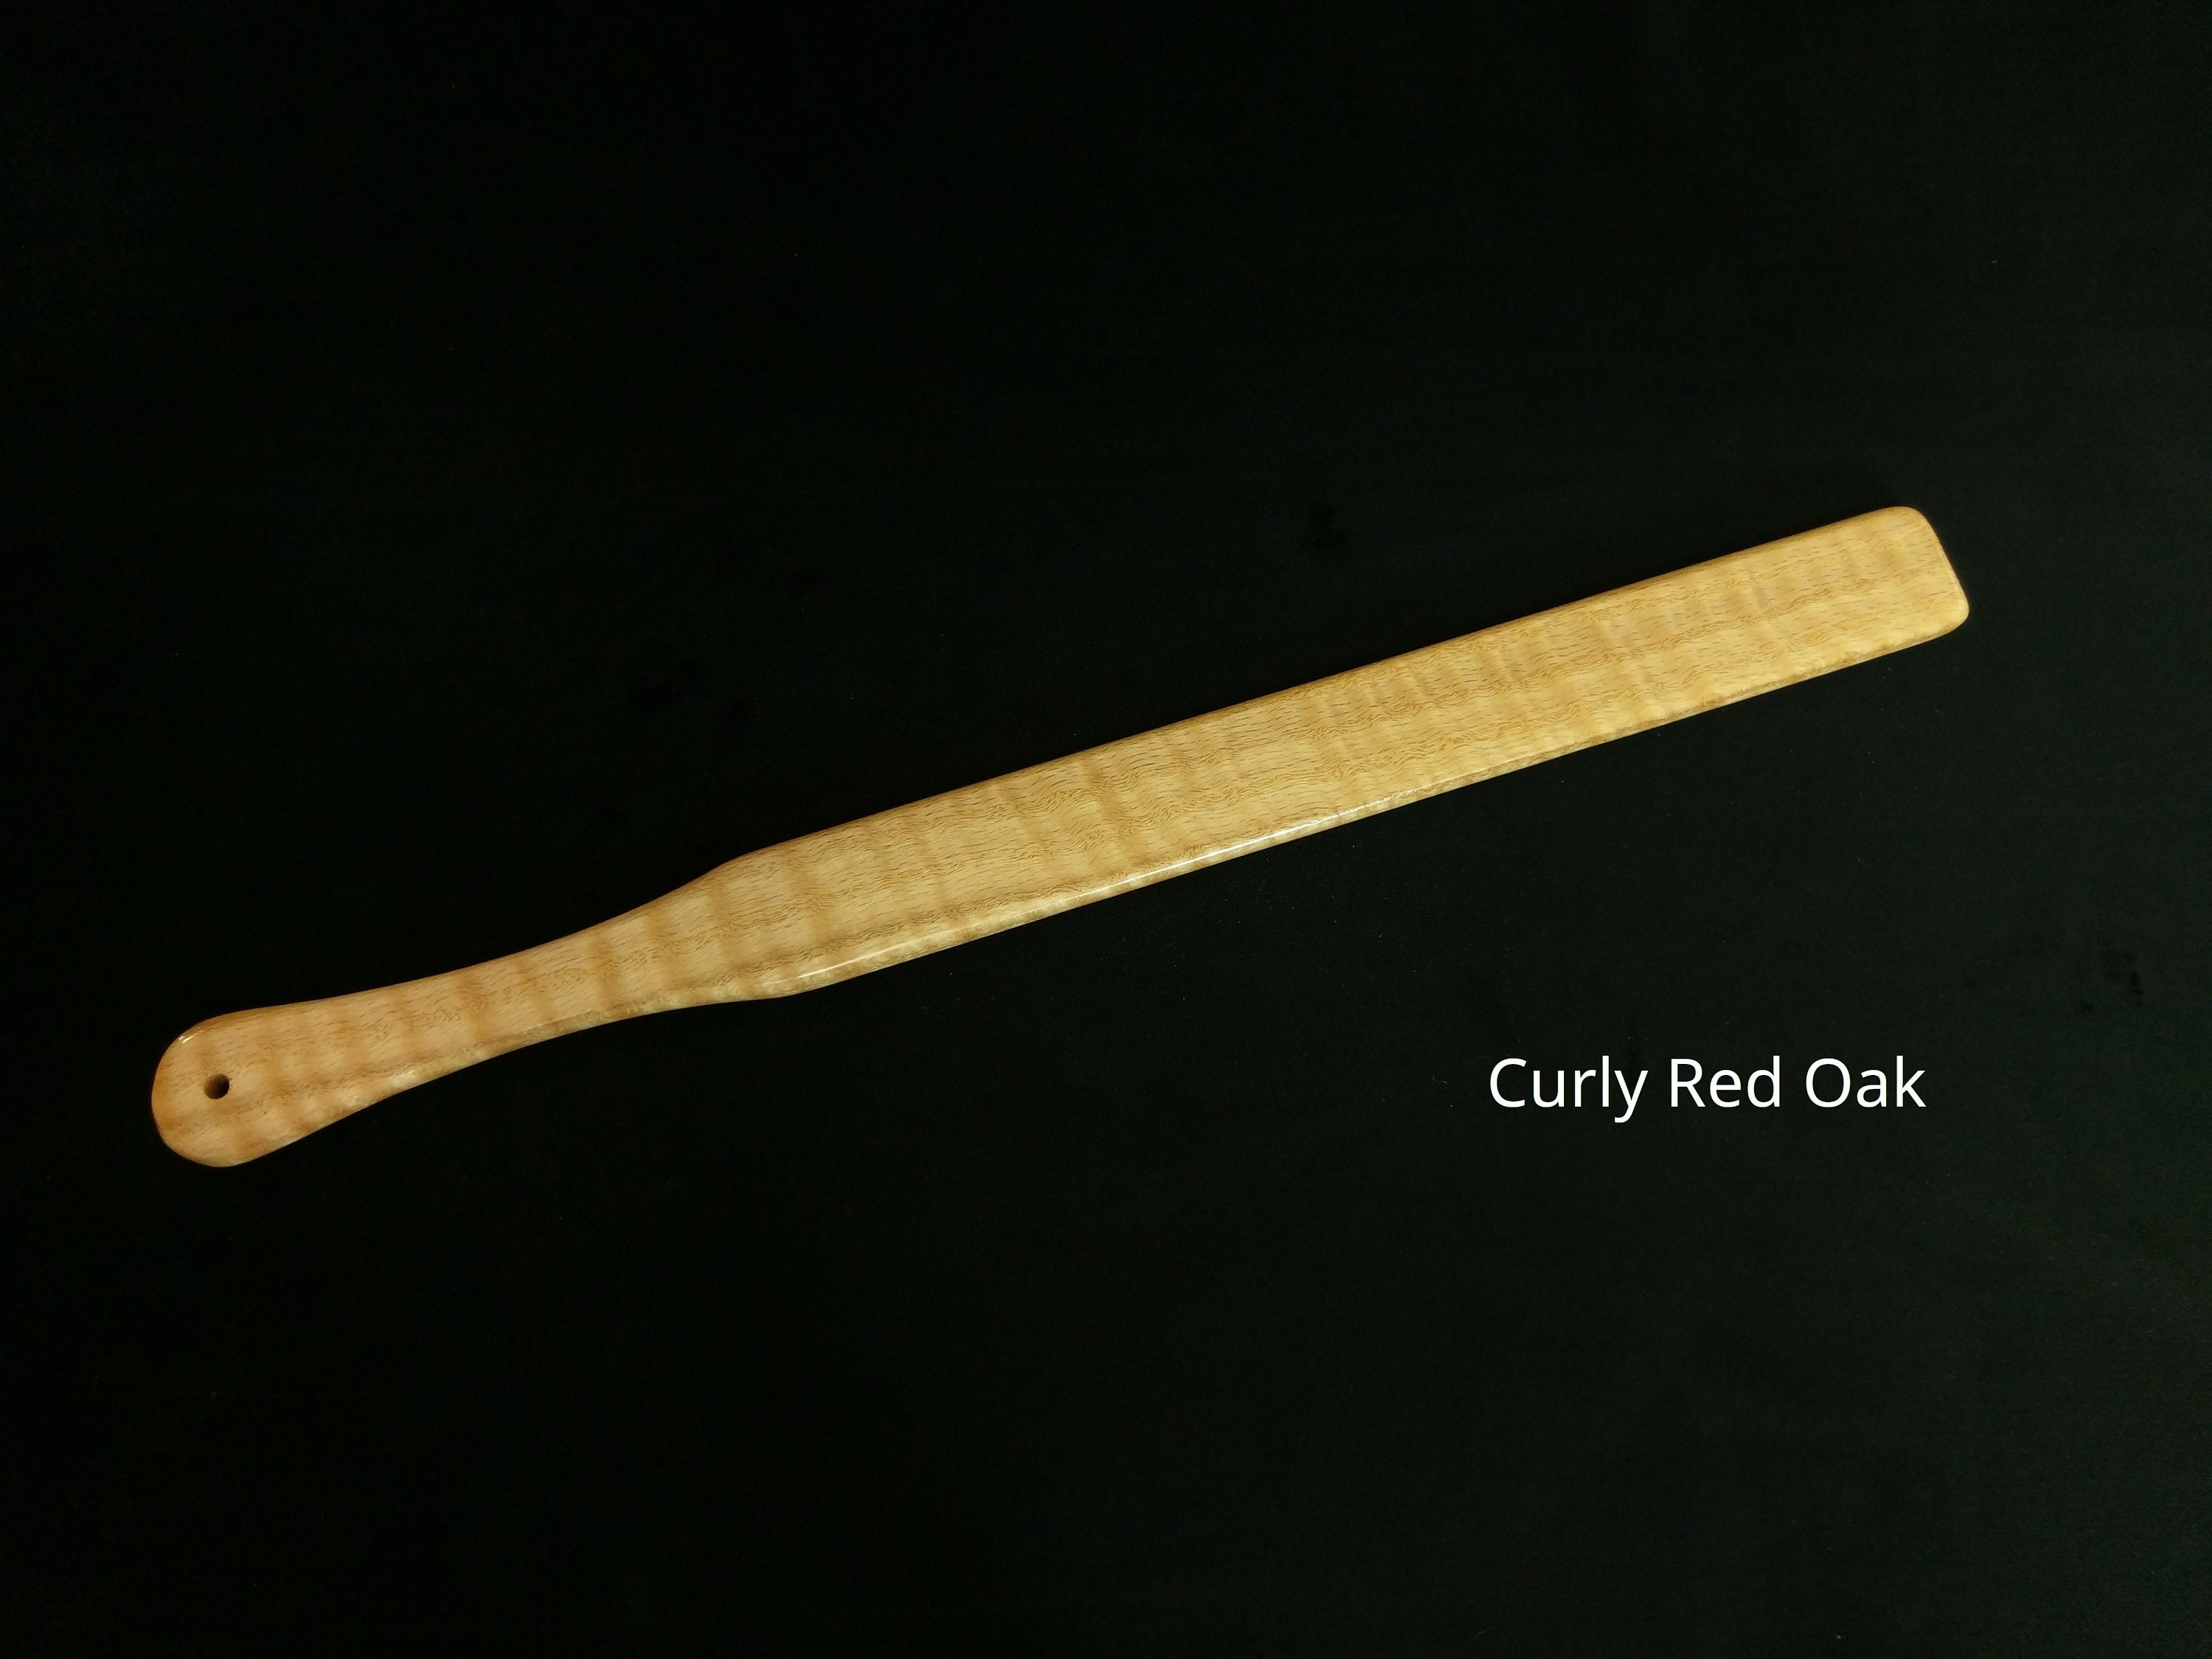 Strict Wood Paddle - Review - The Kinky Pinky